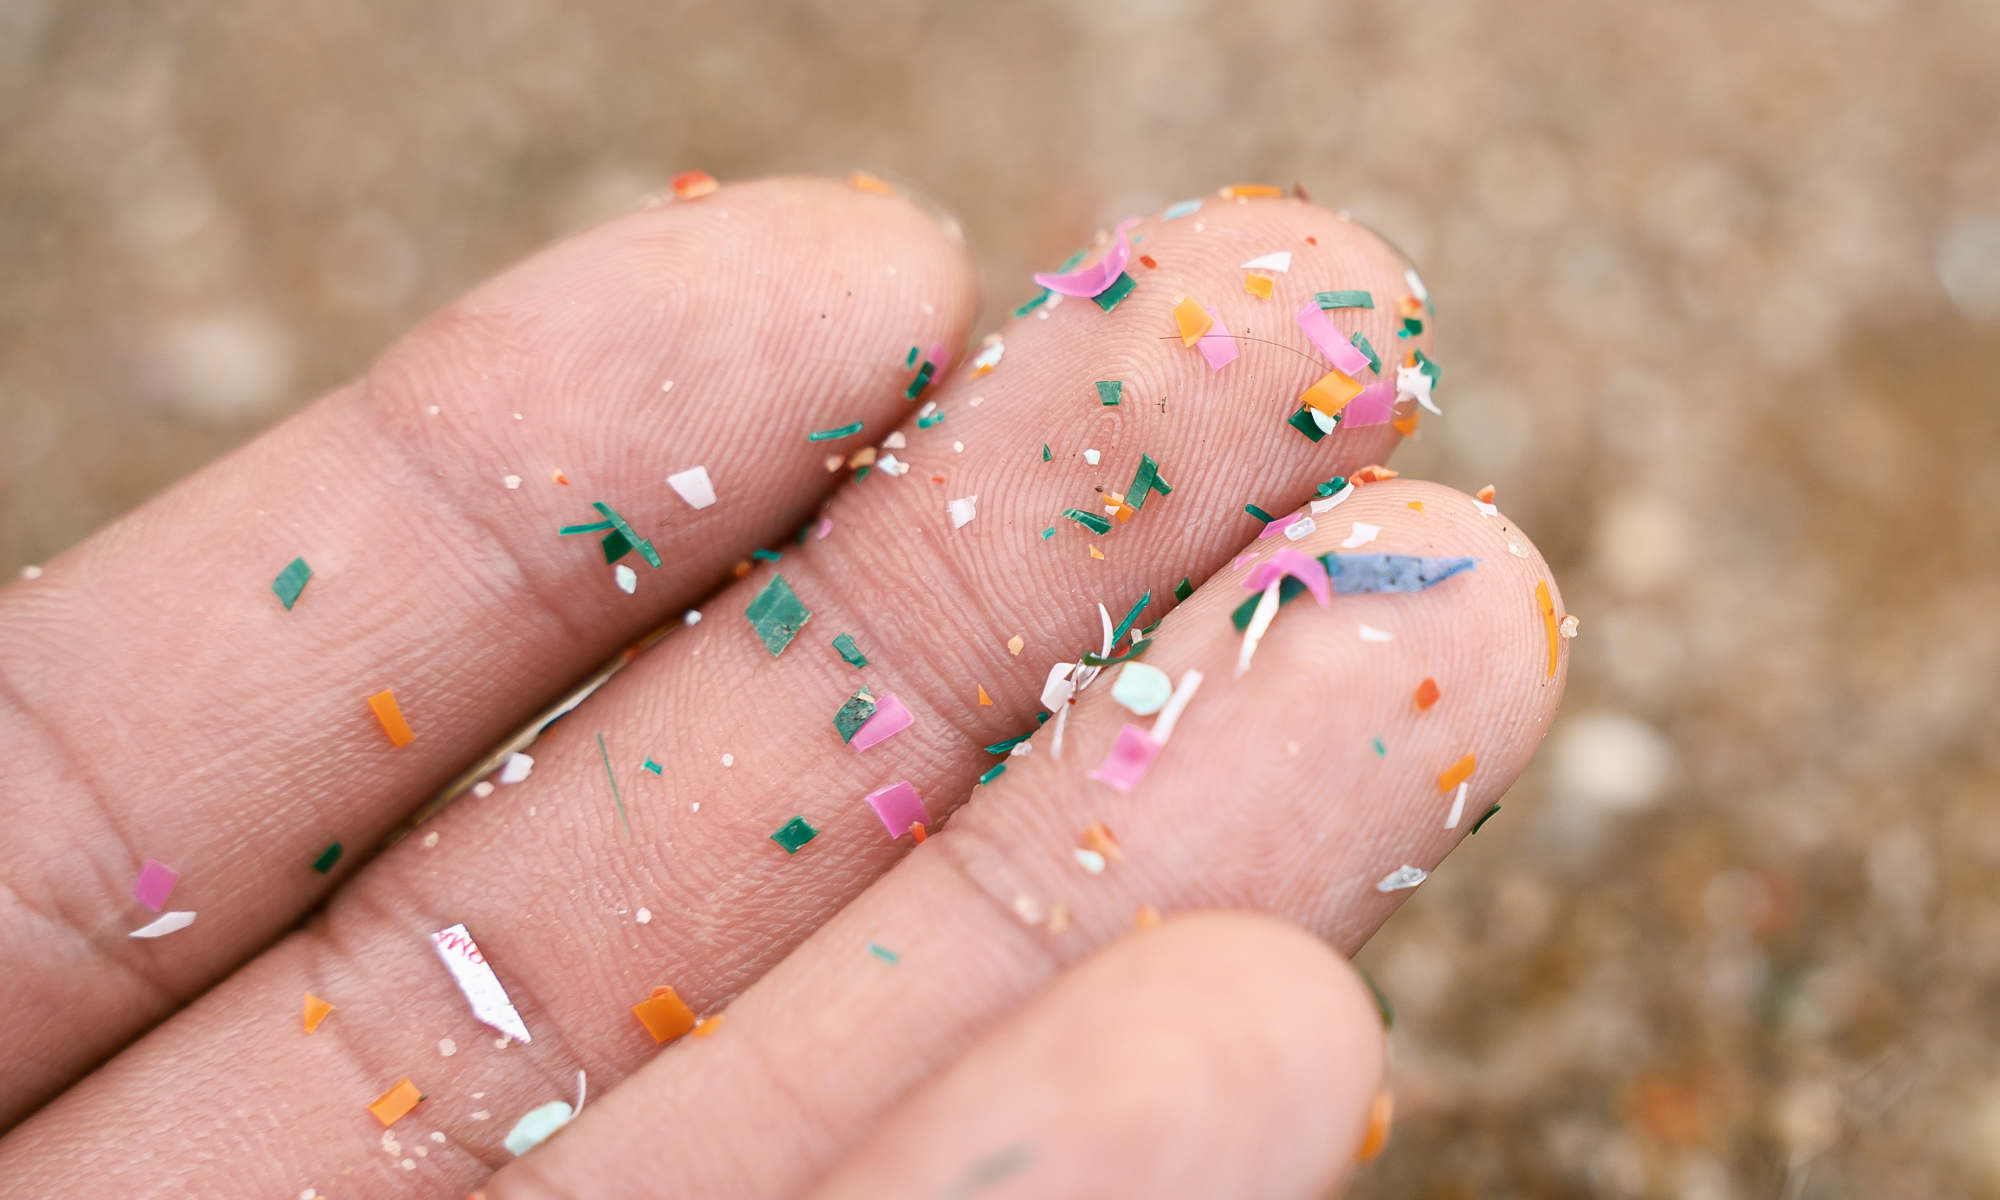 Close-up of fingers covered in tiny shards of microplastics.